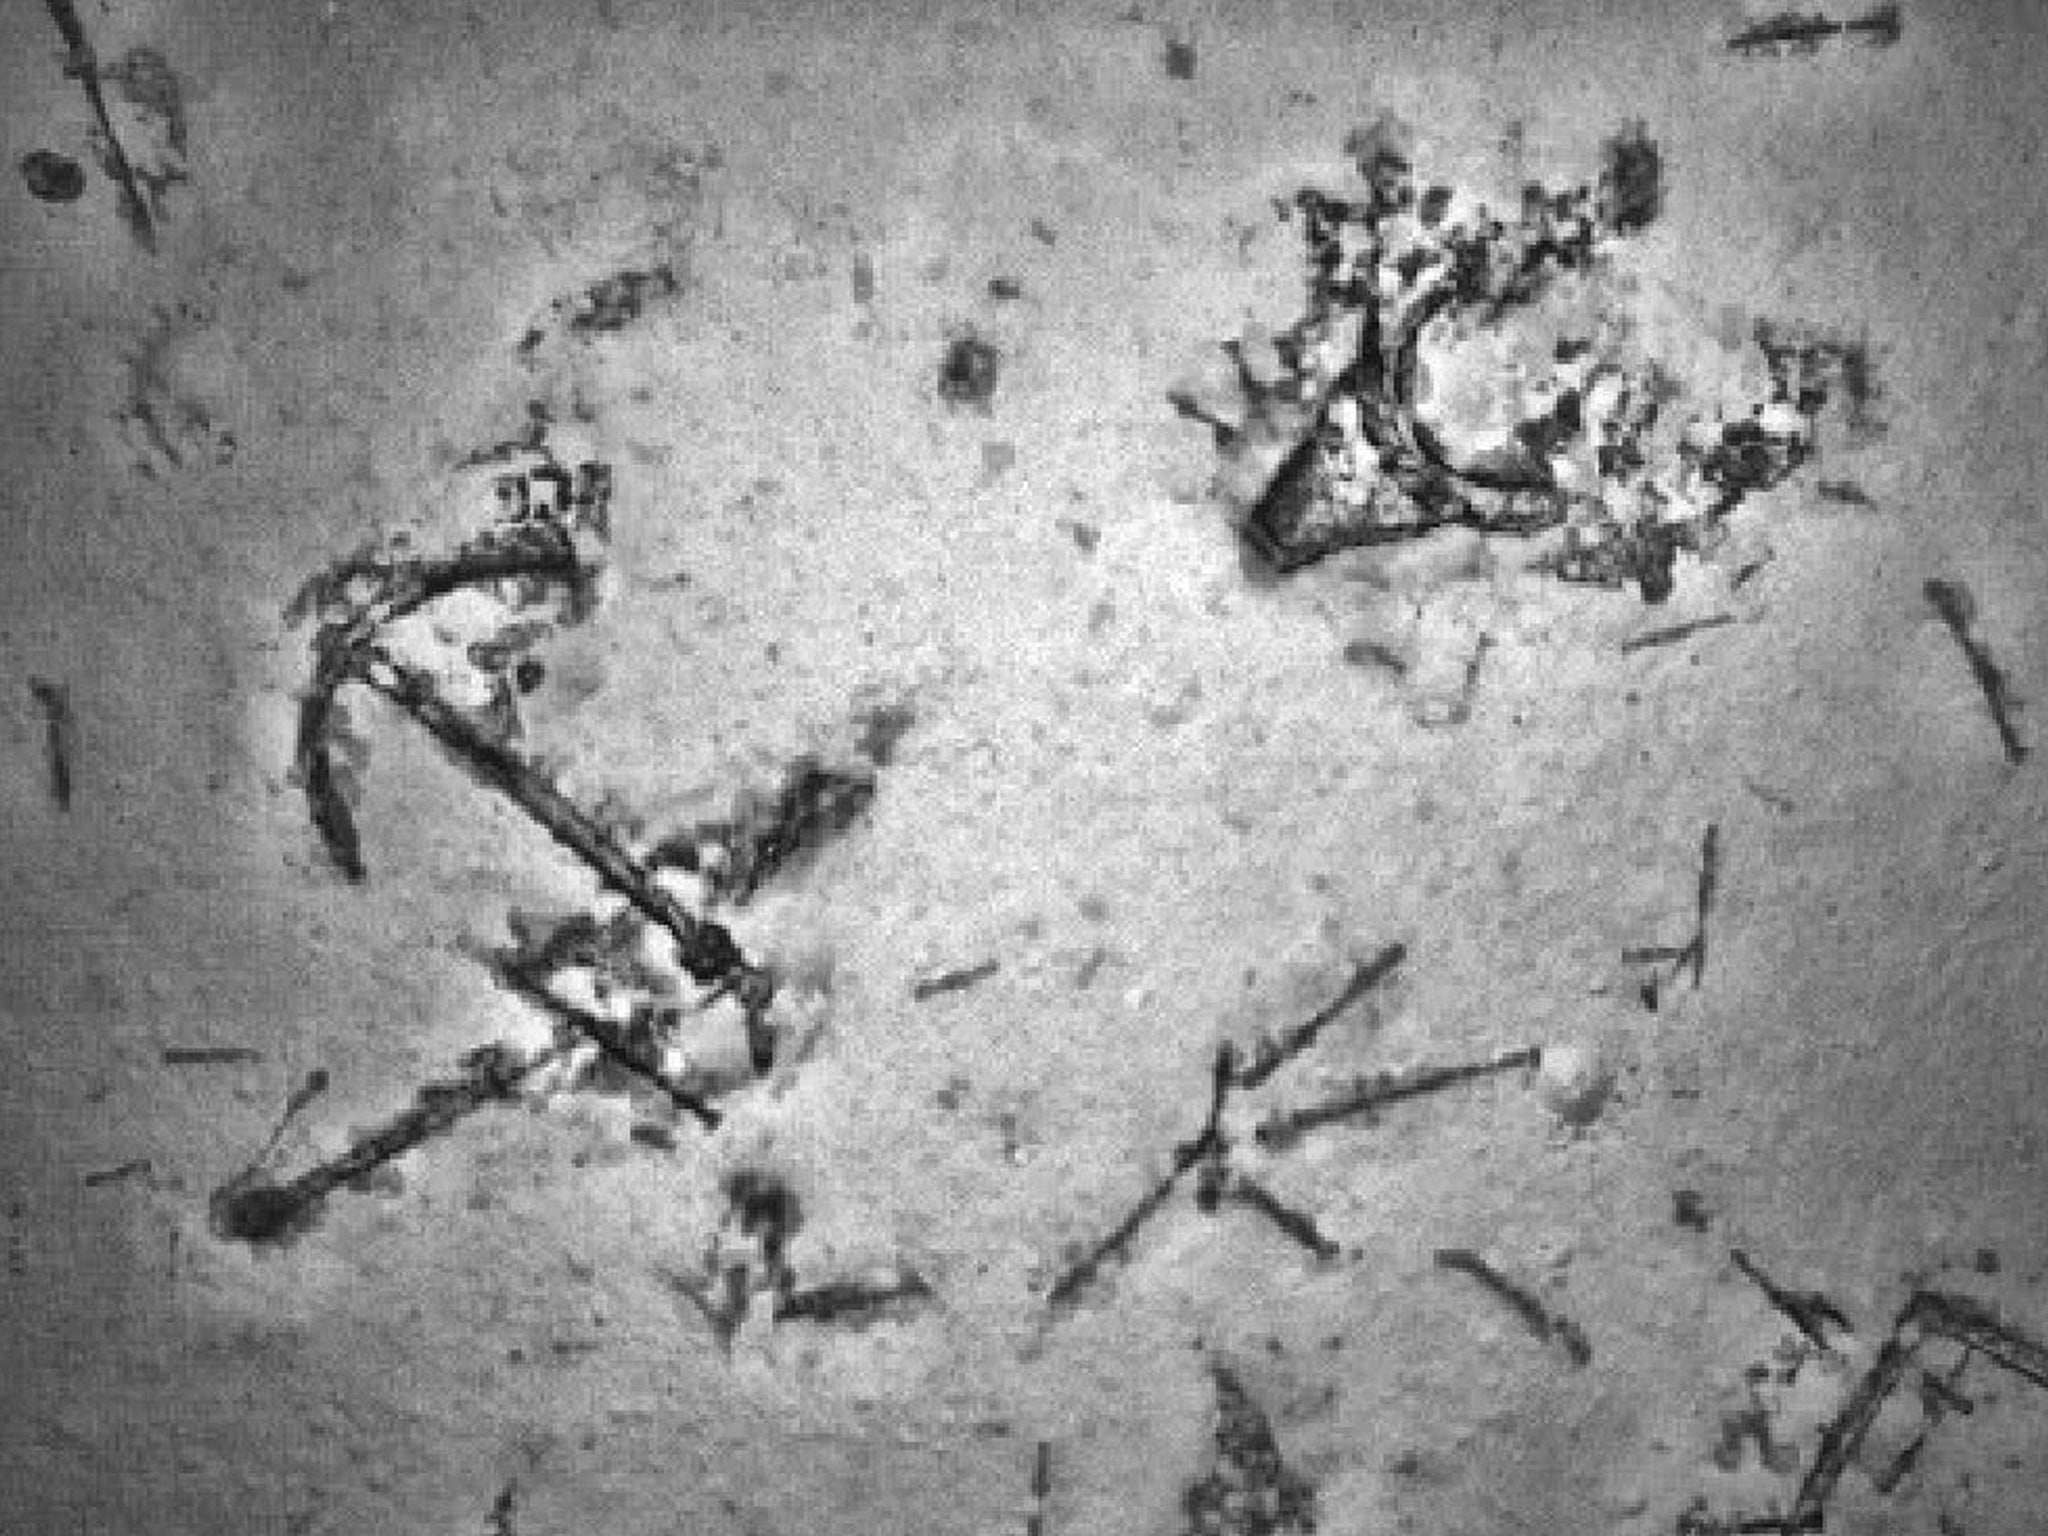 A previously uncharted shipwreck discovered in the southern Indian Ocean during the search for flight MH370